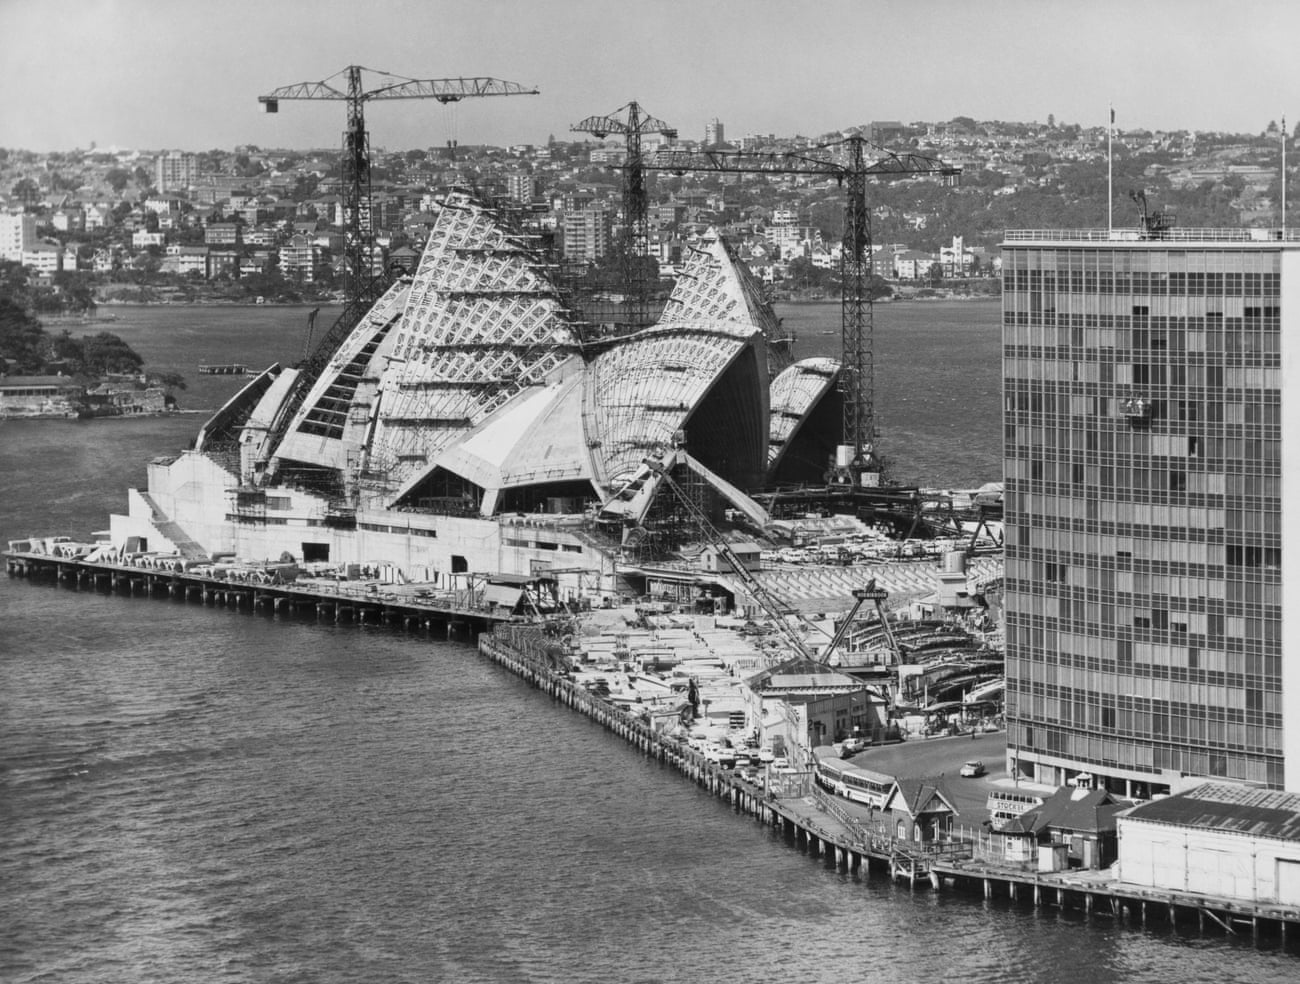  Building an icon: cranes rise above the harbour during the construction of the Sydney Opera House.